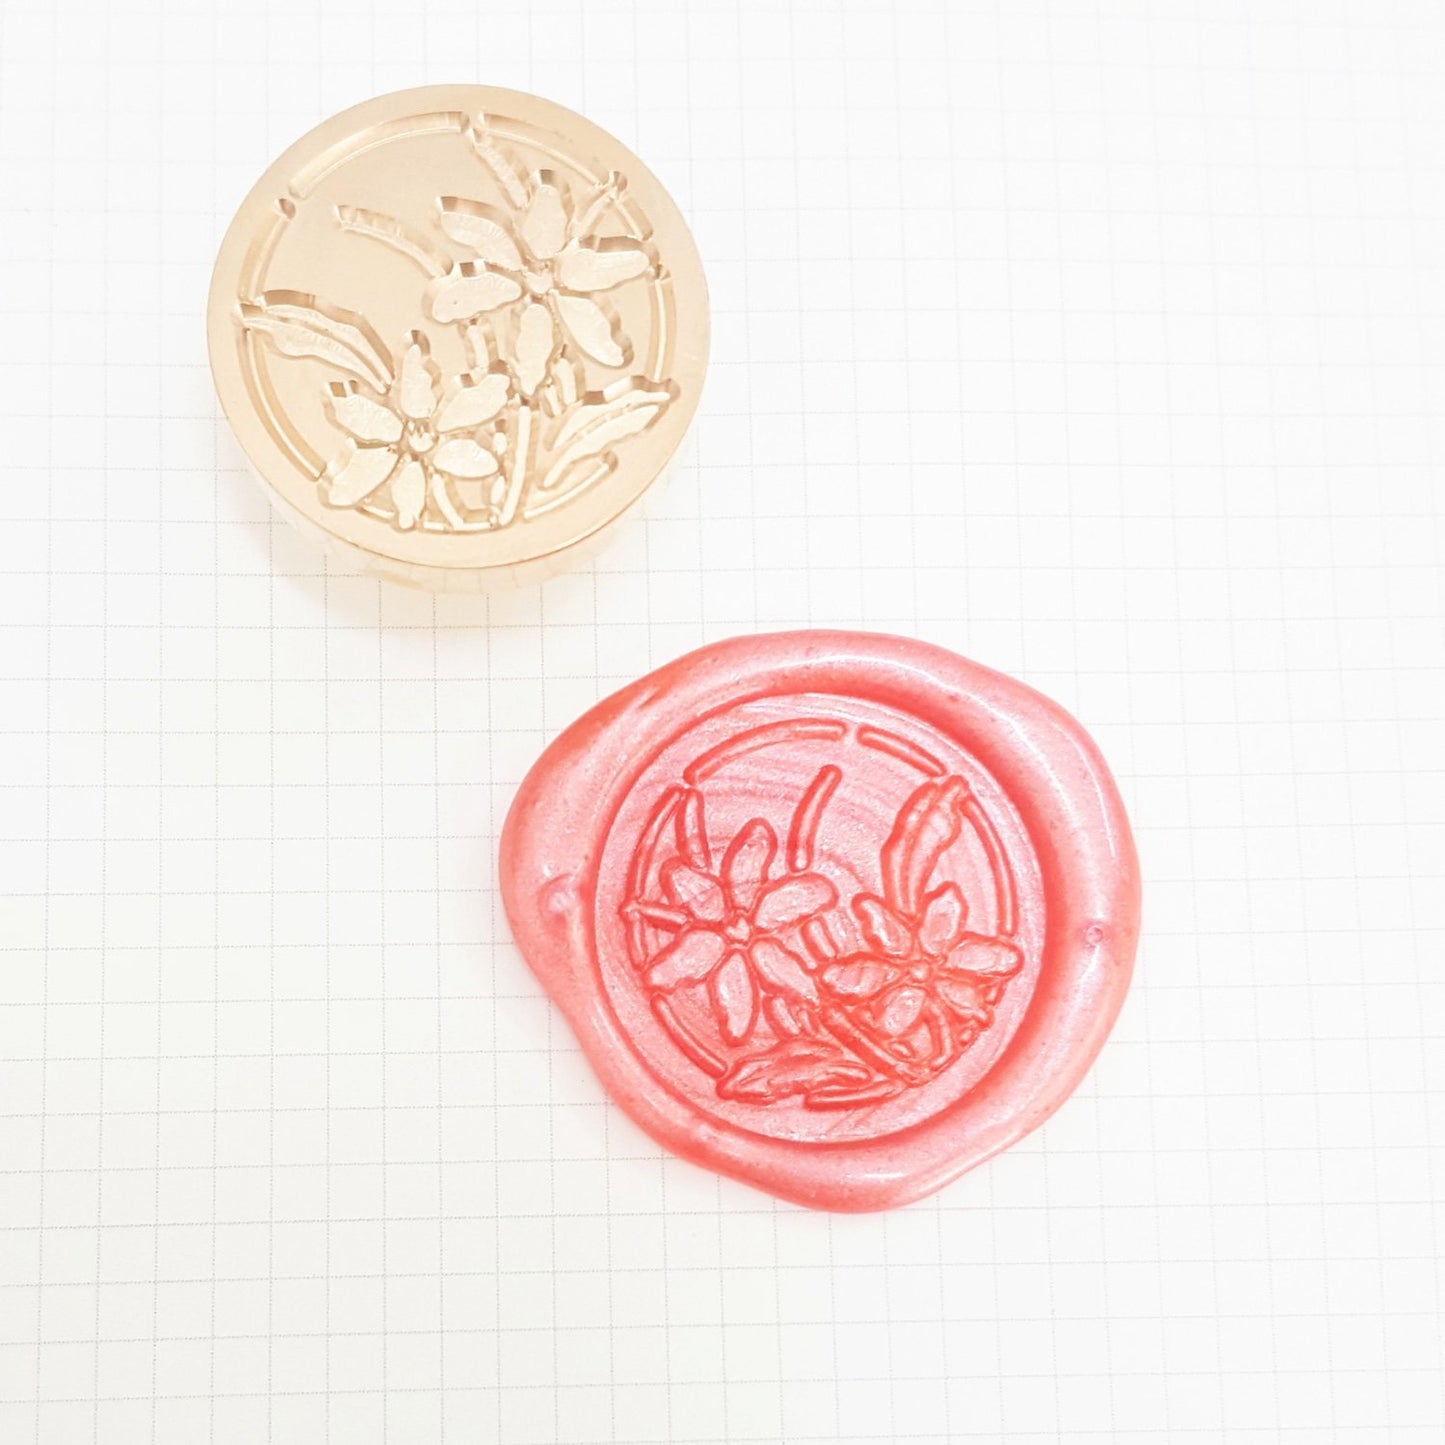 Wax Seal Stamp - Botanical Collection - Happiness Idea